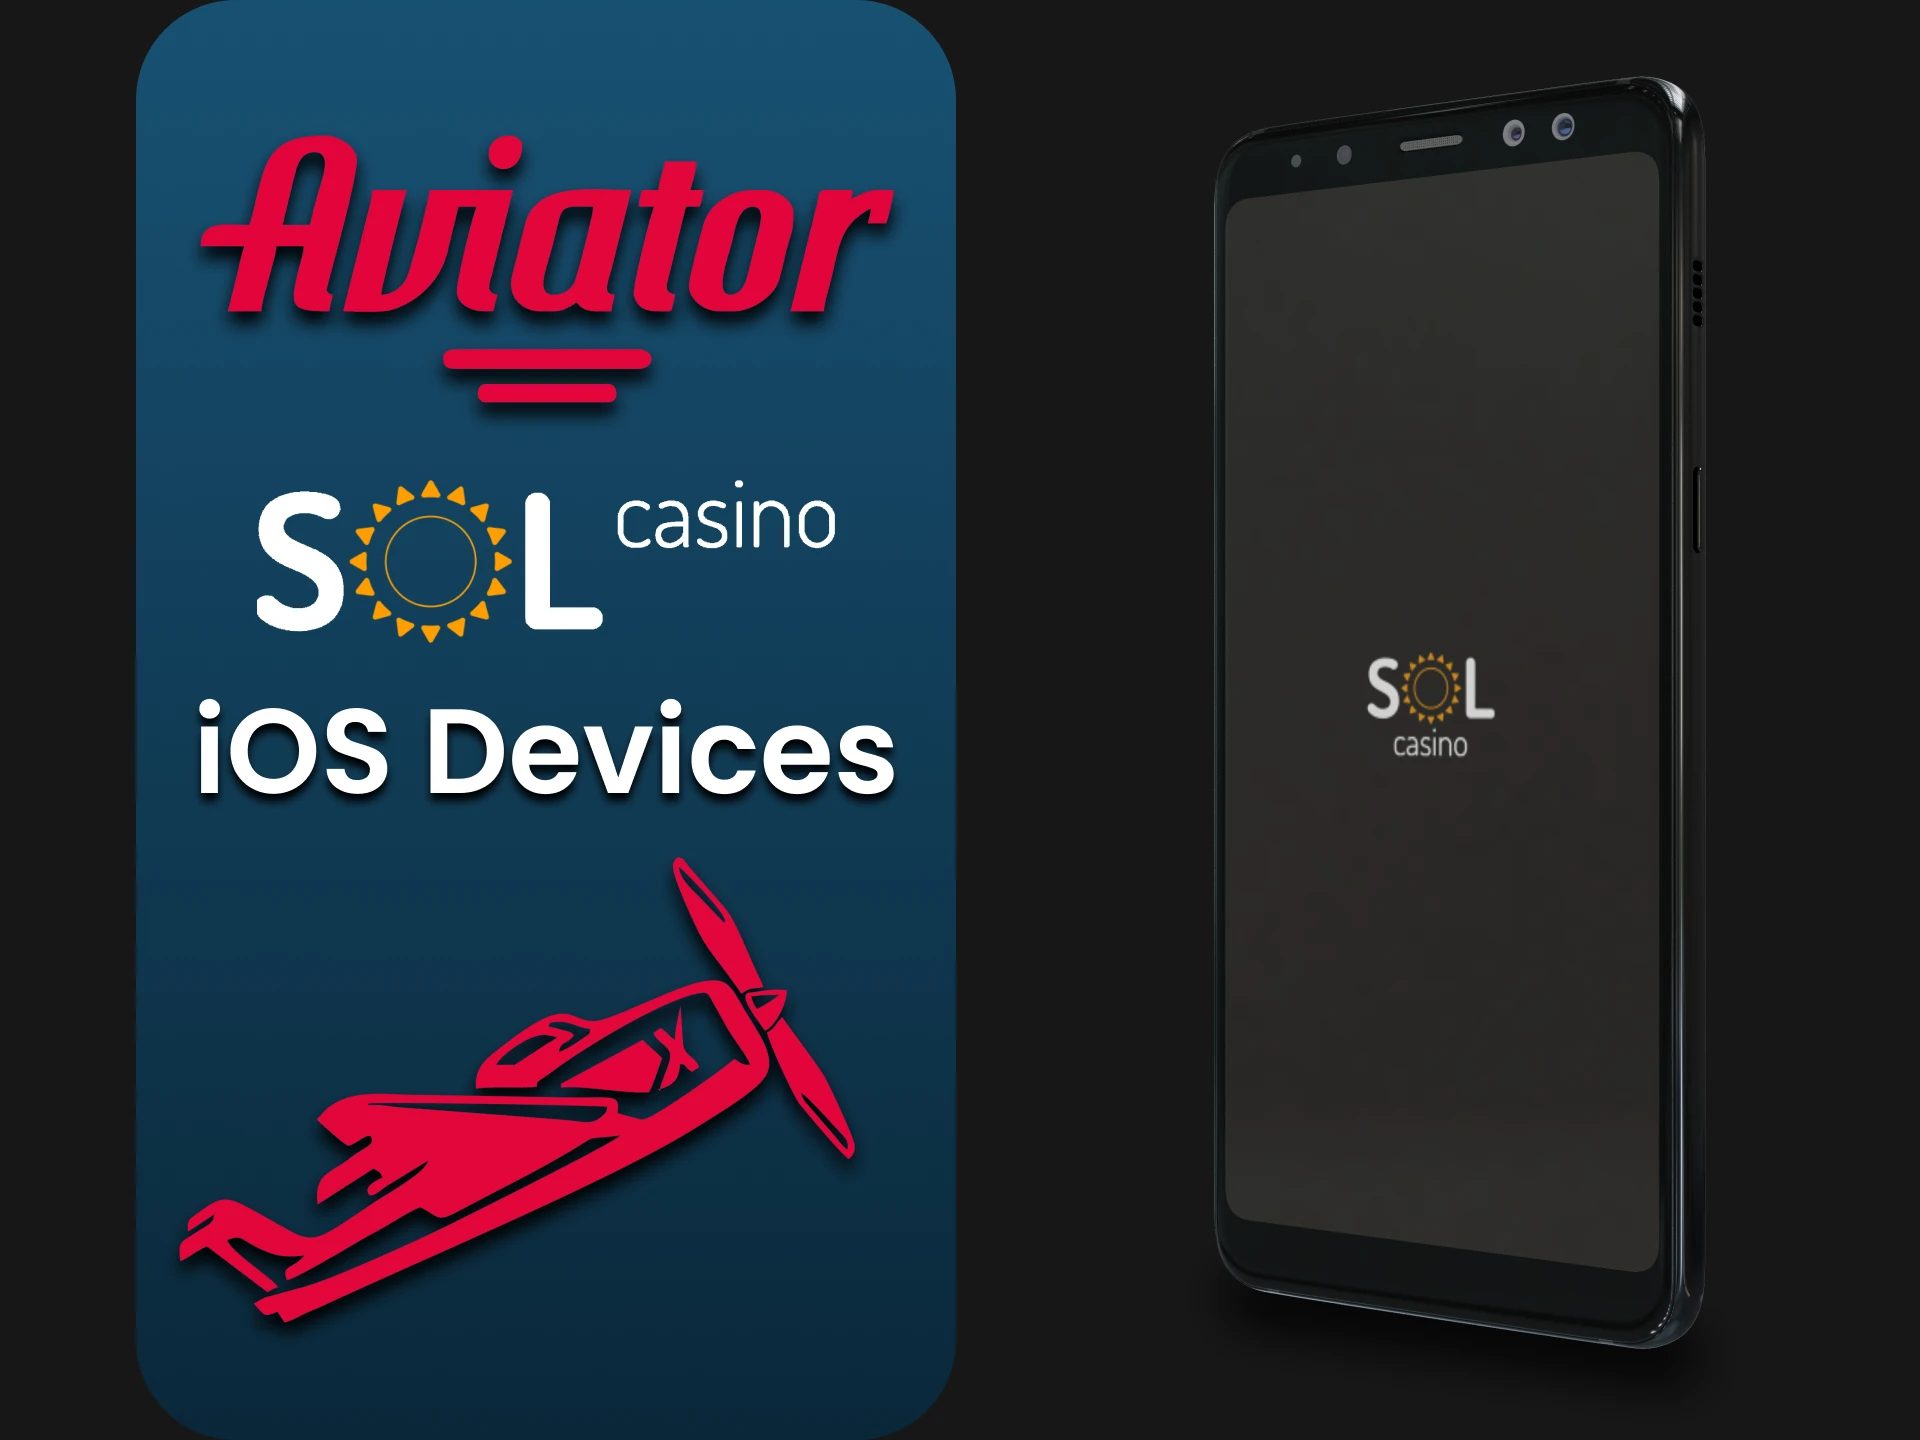 Install the Sol Casino application to play Aviator on iOS.